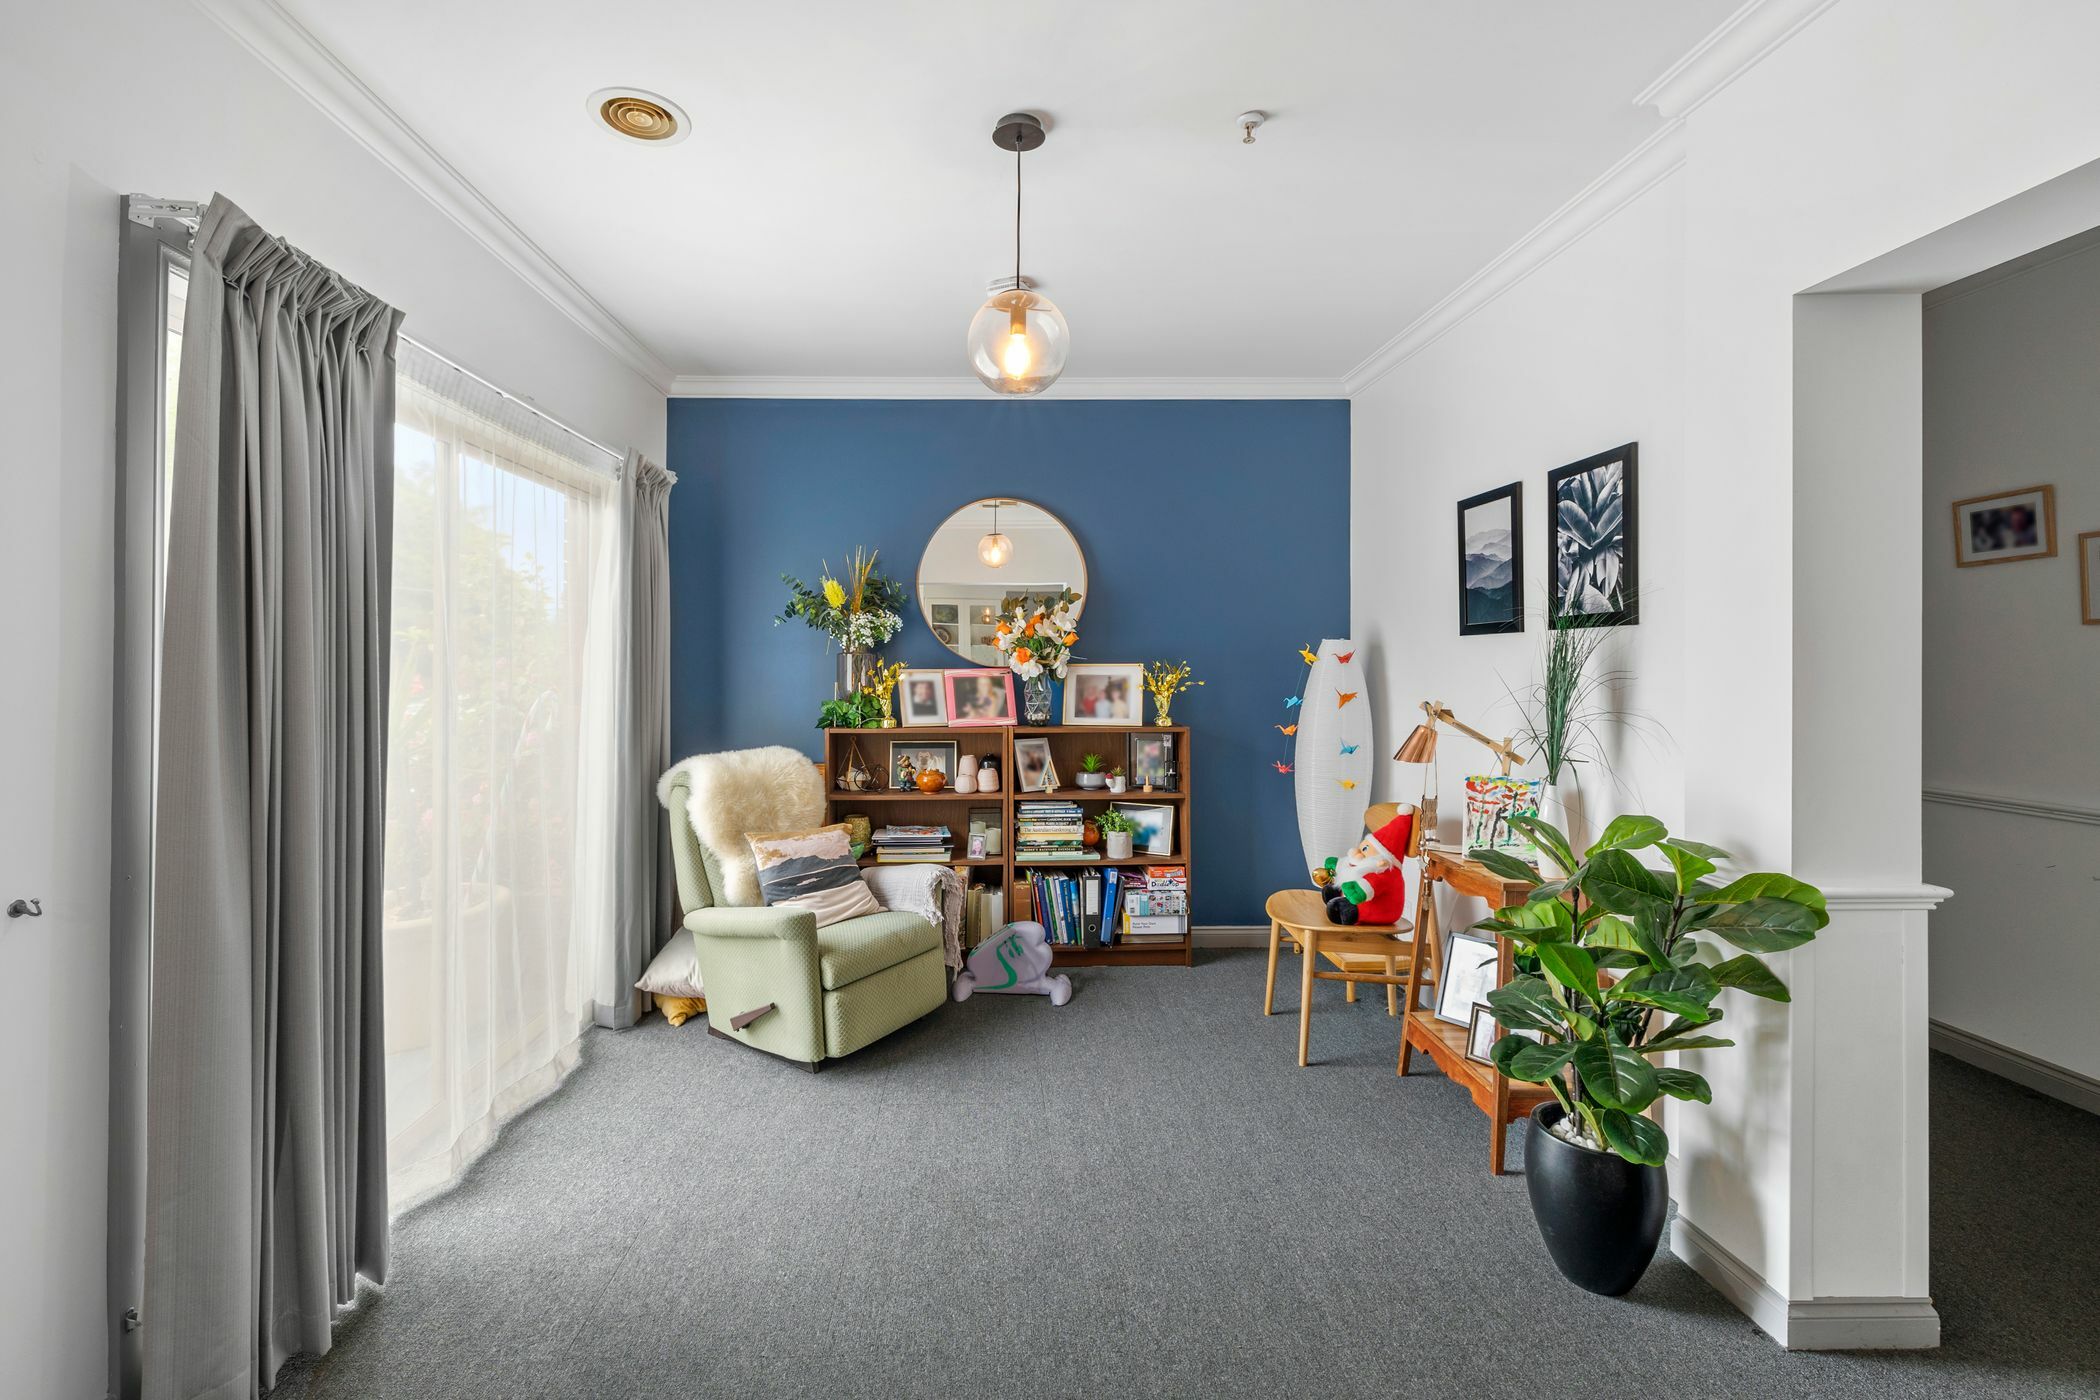 Stylish sitting room with a blue feature wall recliner chair potted plant and bookshelf